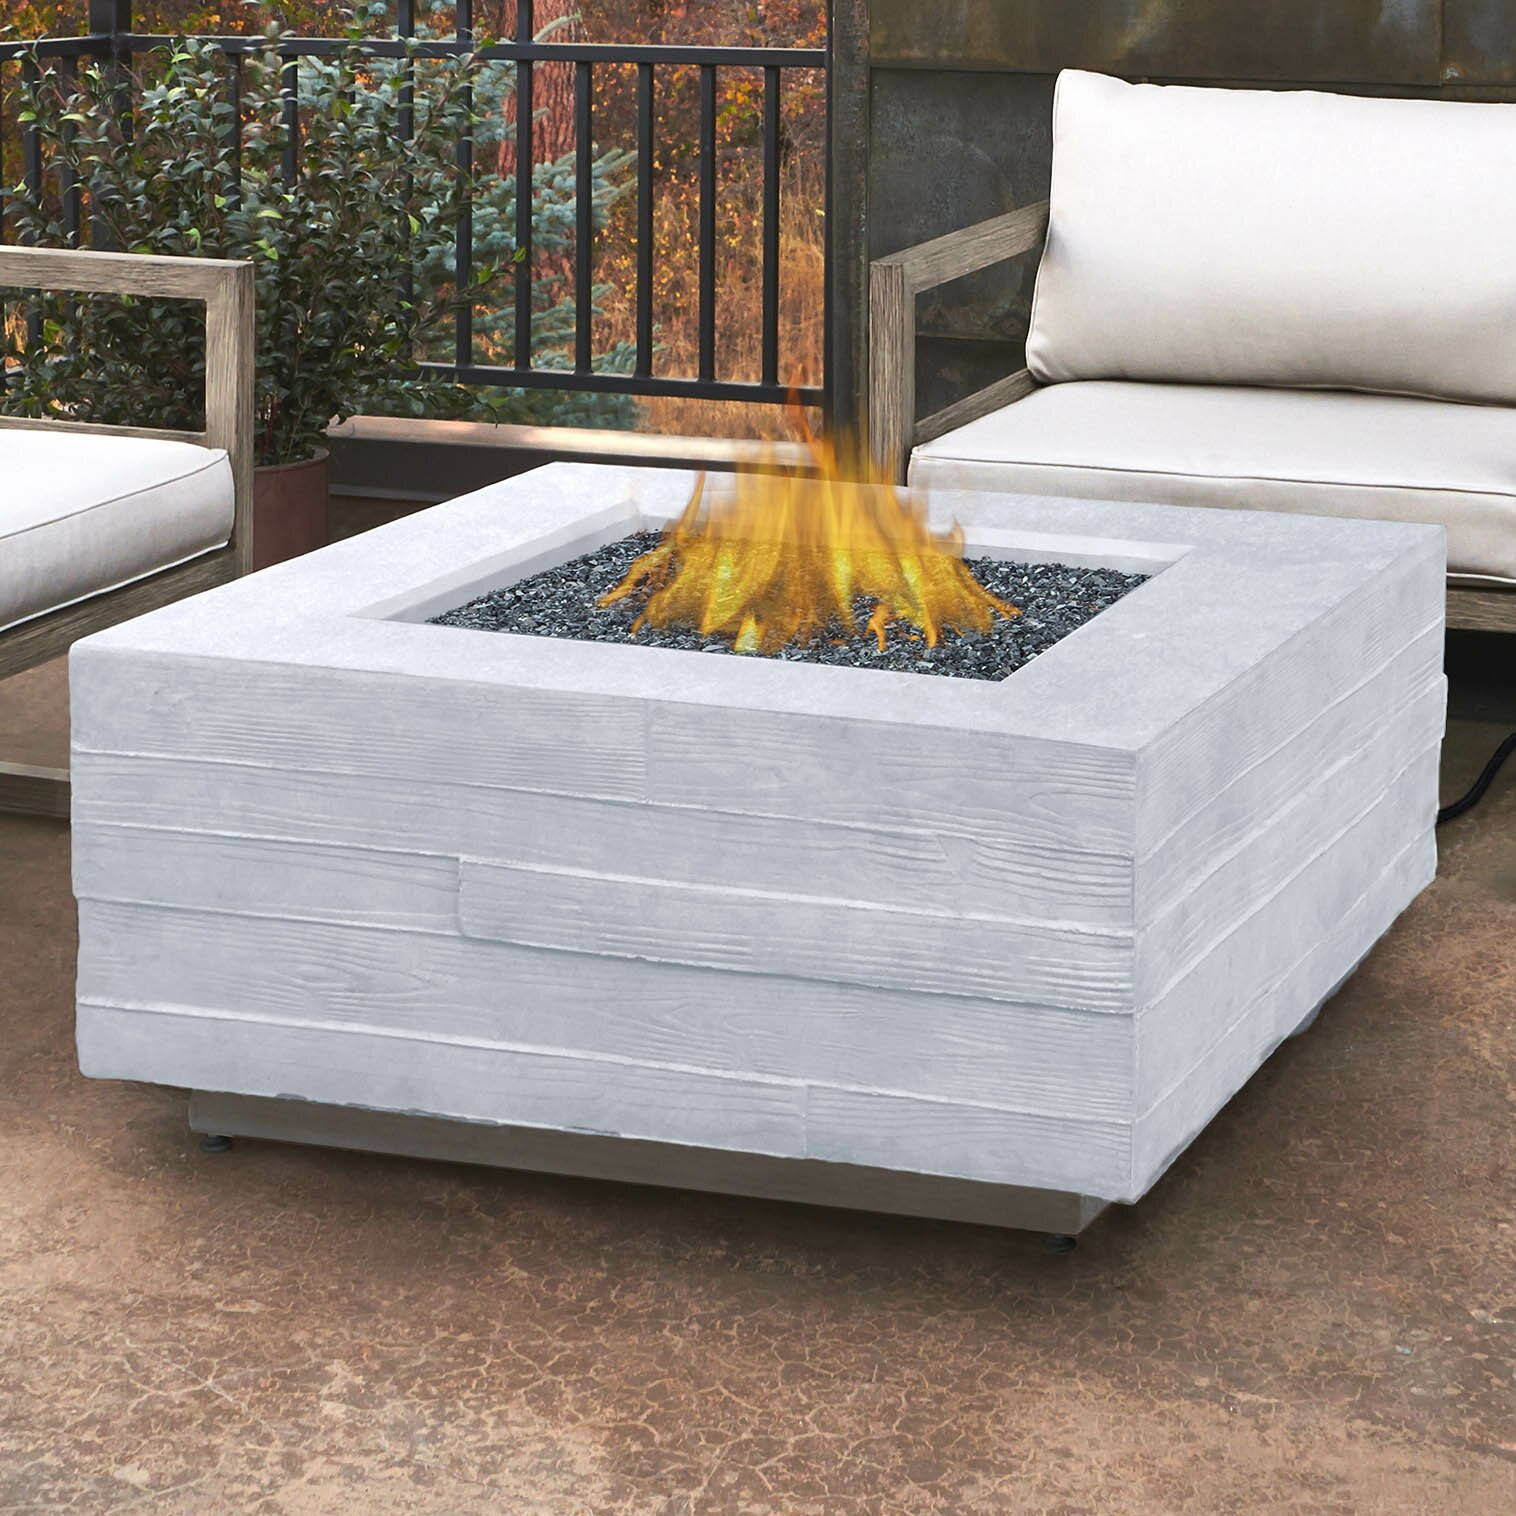 Outdoor Fire Pit Table
 Real Flame Board Form Propane Outdoor Fire Pit Table